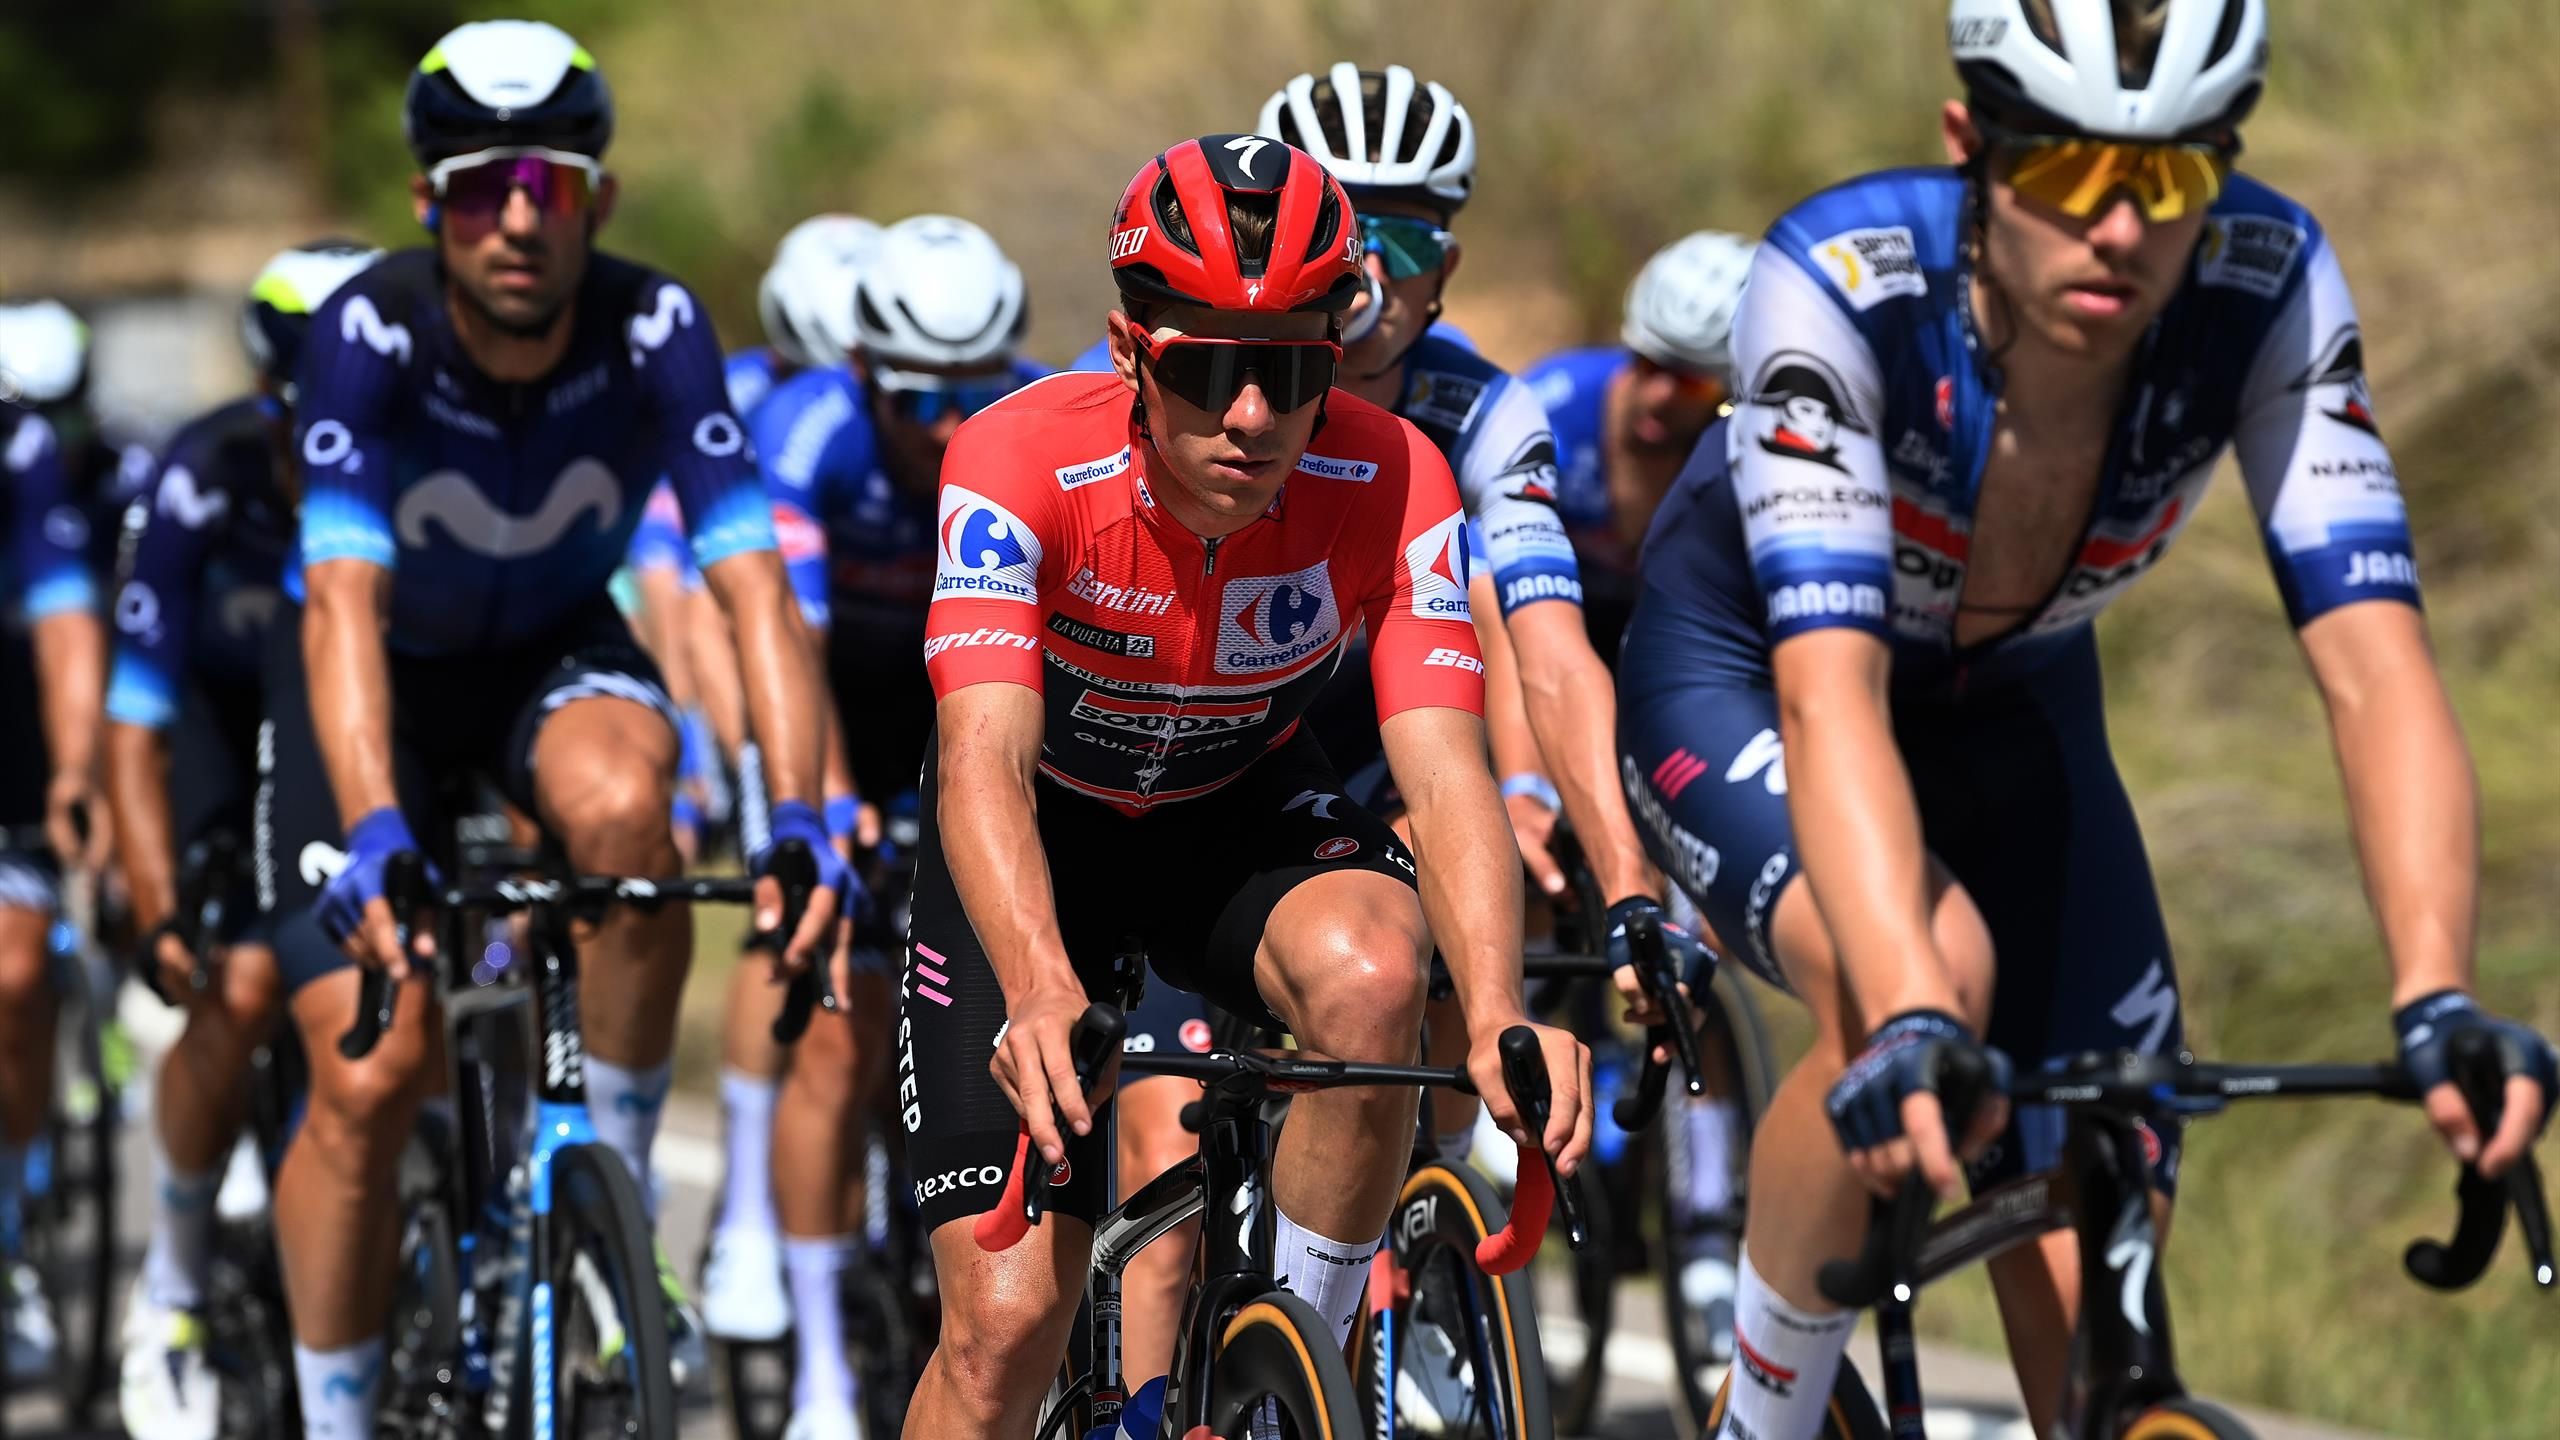 La Vuelta |  Live summary of Stage 6 – Rising to the stars in Javalambre with Evenepoel in red